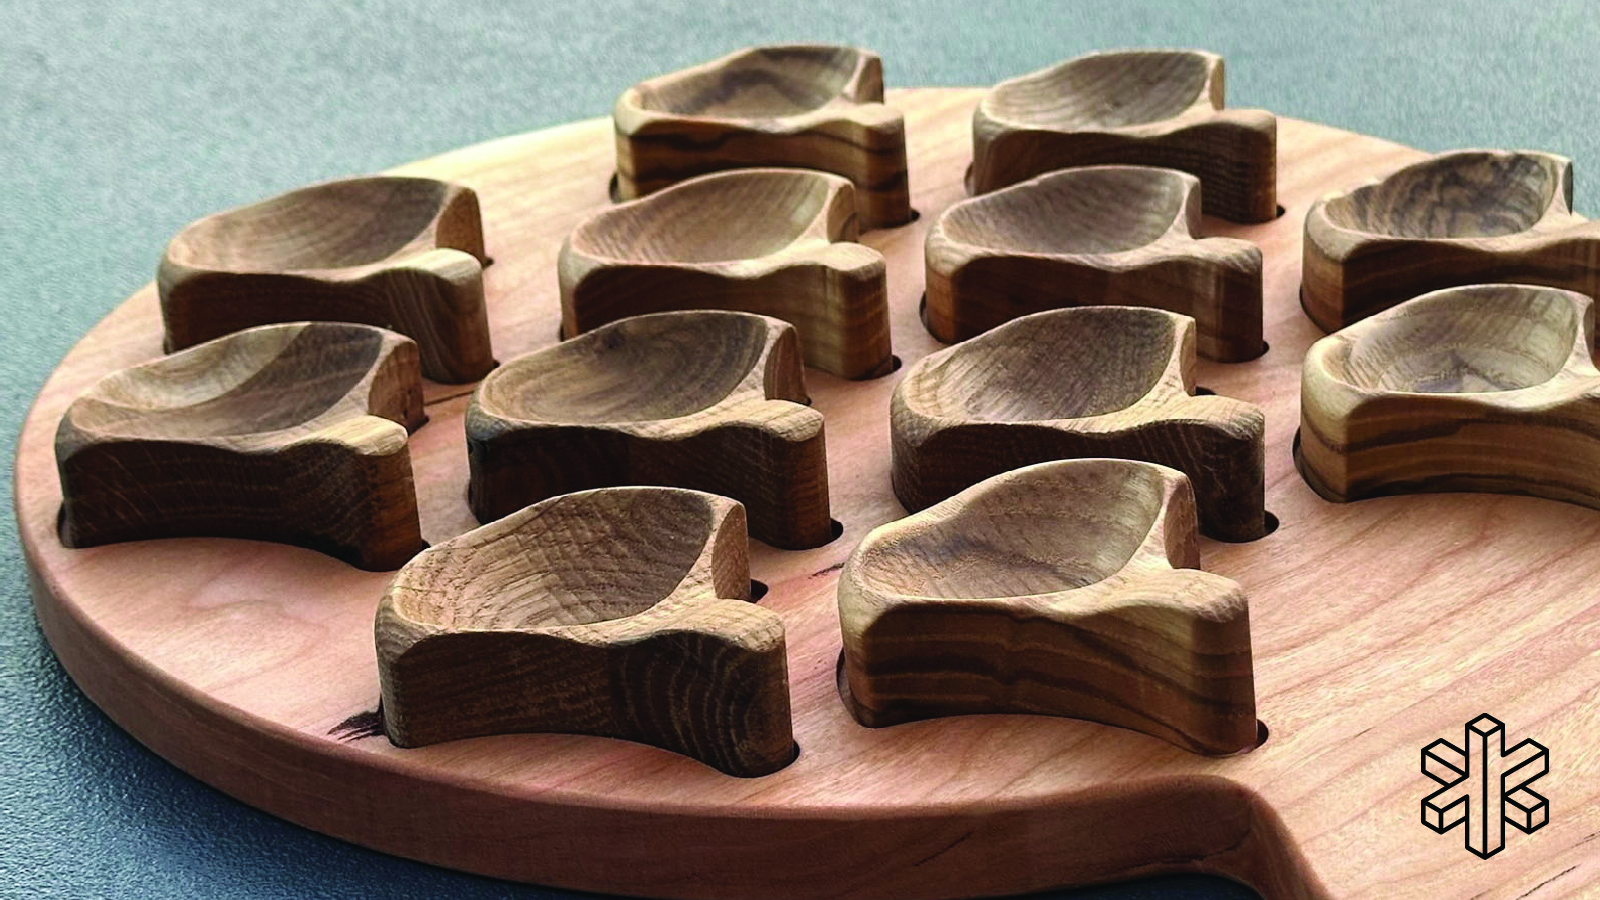 tray with fan-shaped wooden holders for food